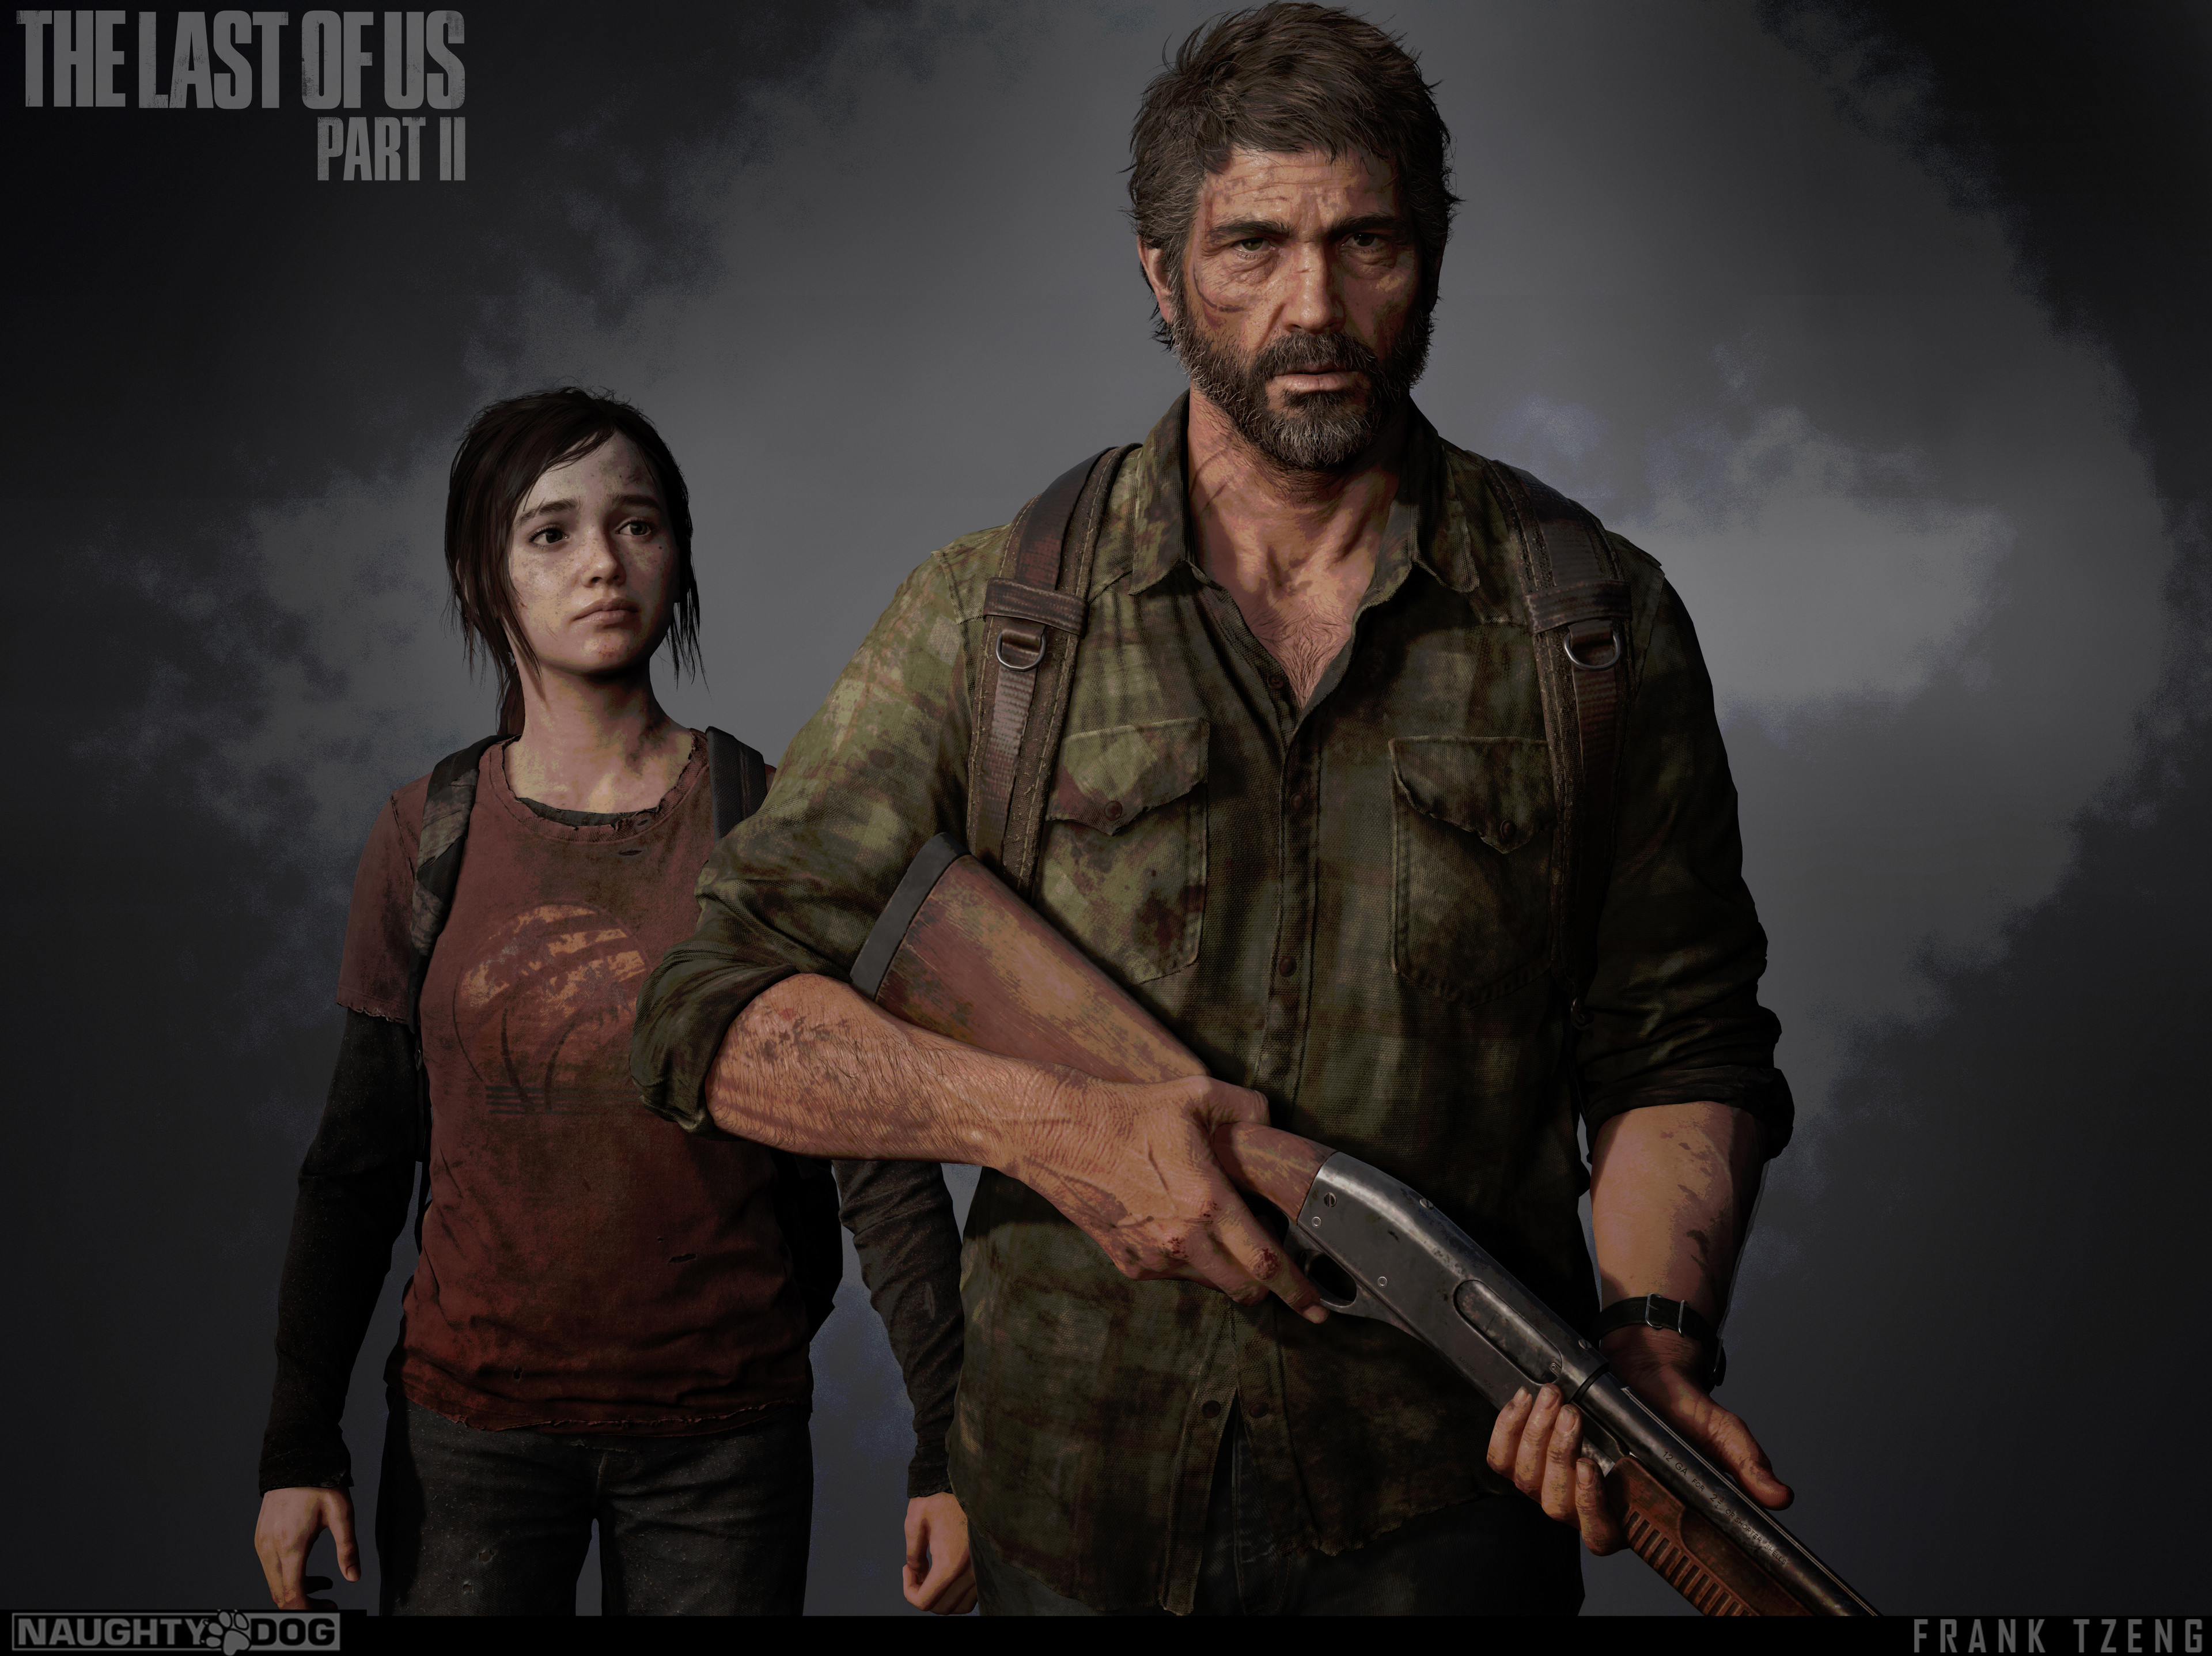 Ellie is the lead character in The Last of Us Part 2